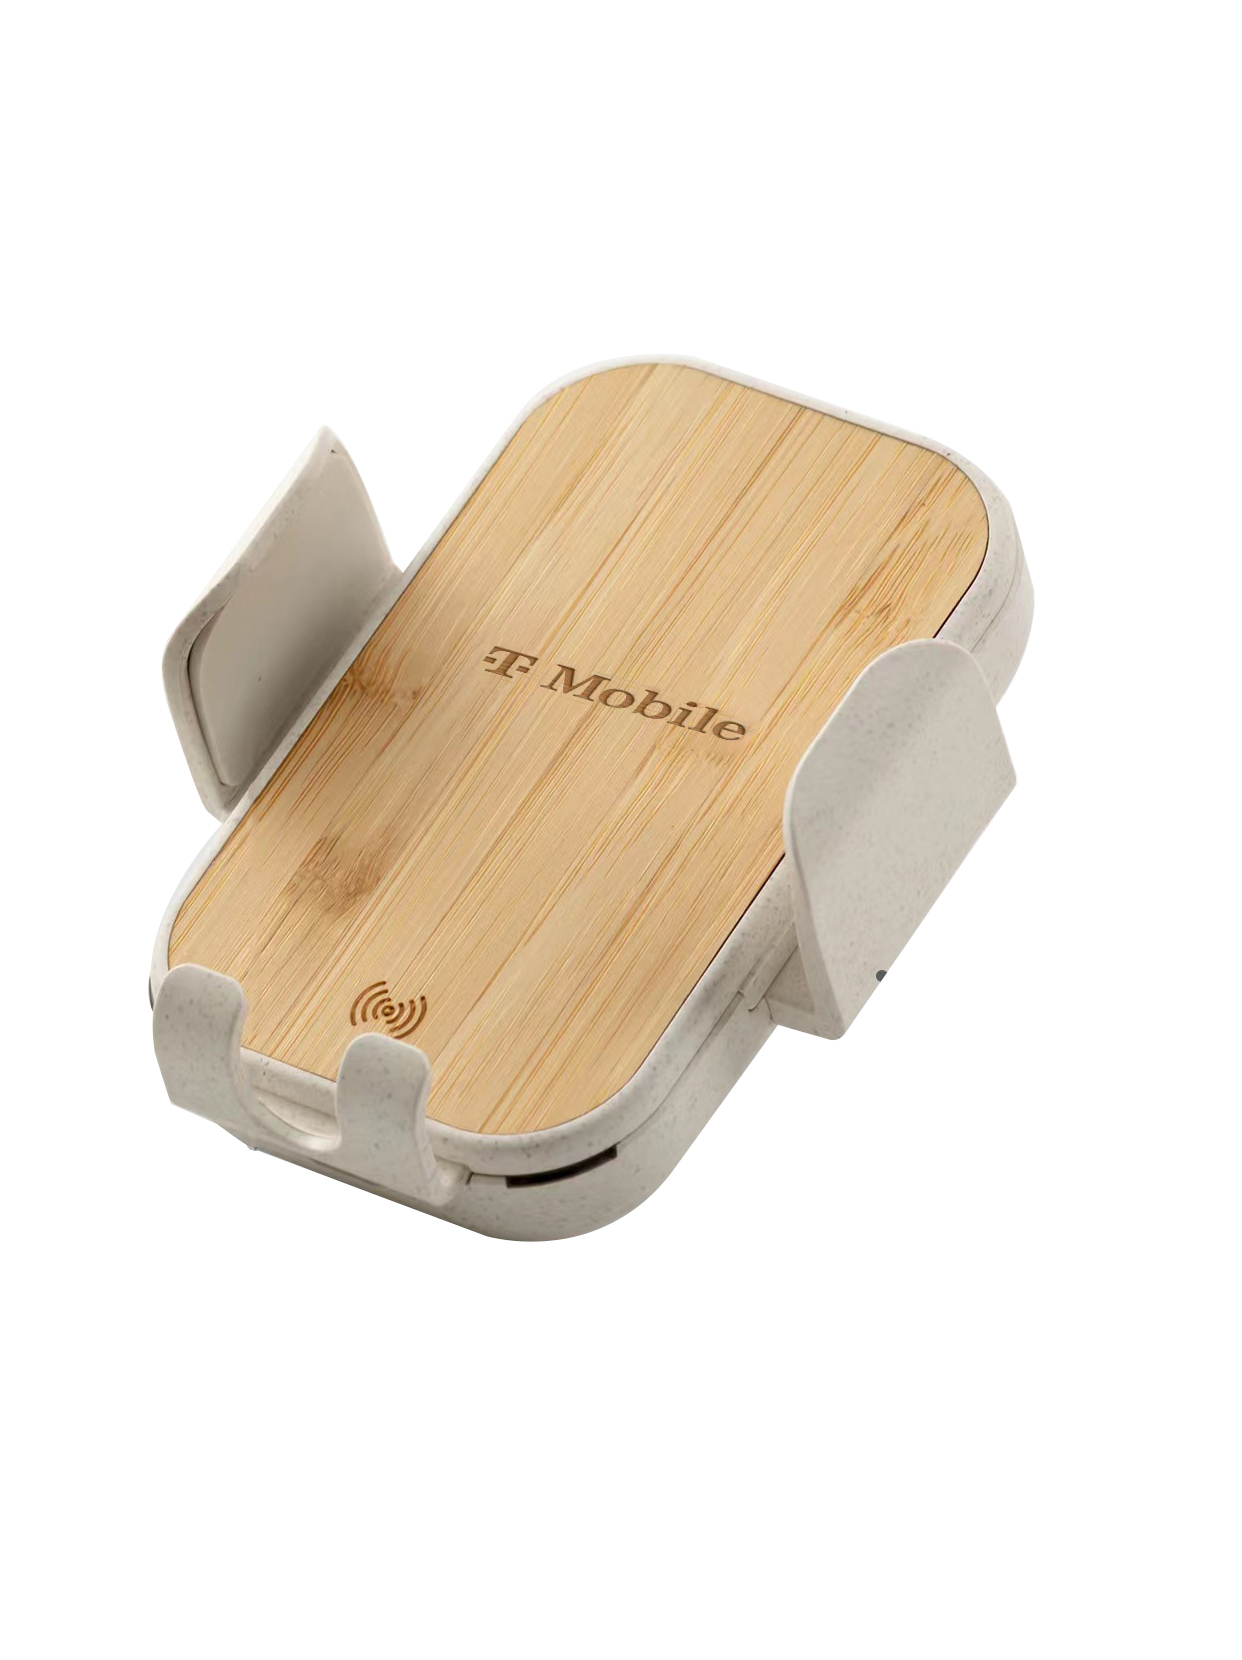 Eco-Friendly Wireless Bamboo Car Charger - 15W Power, 360-Degree Rotatable